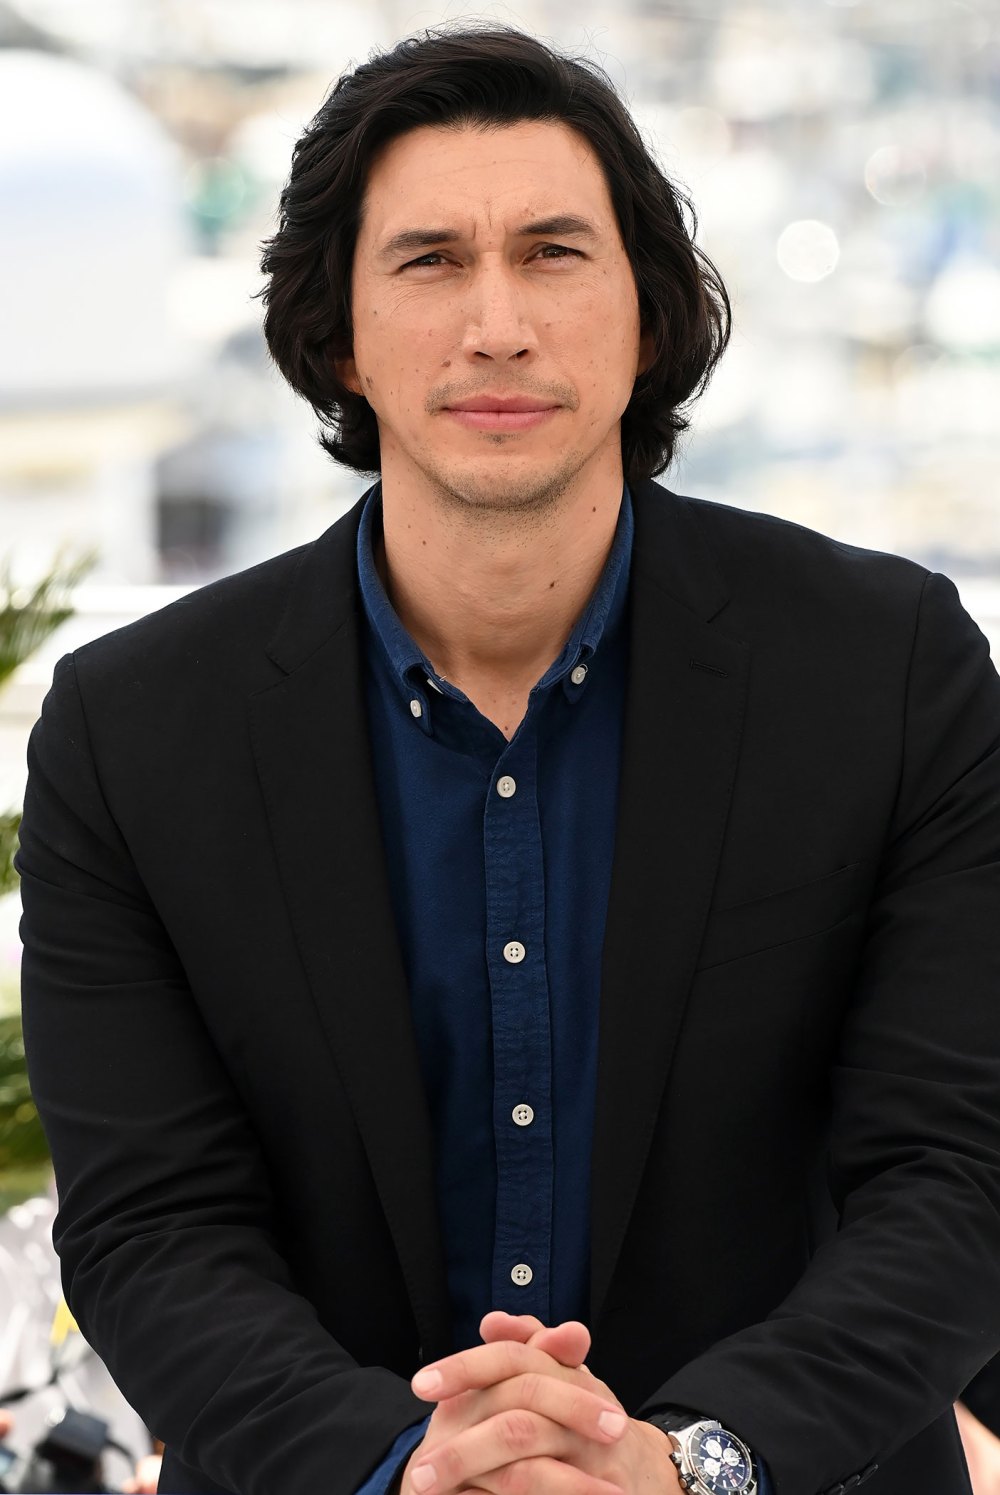 Adam Driver Is ‘Very Happy’ to Be the Face of Burberry’s New Fragrance